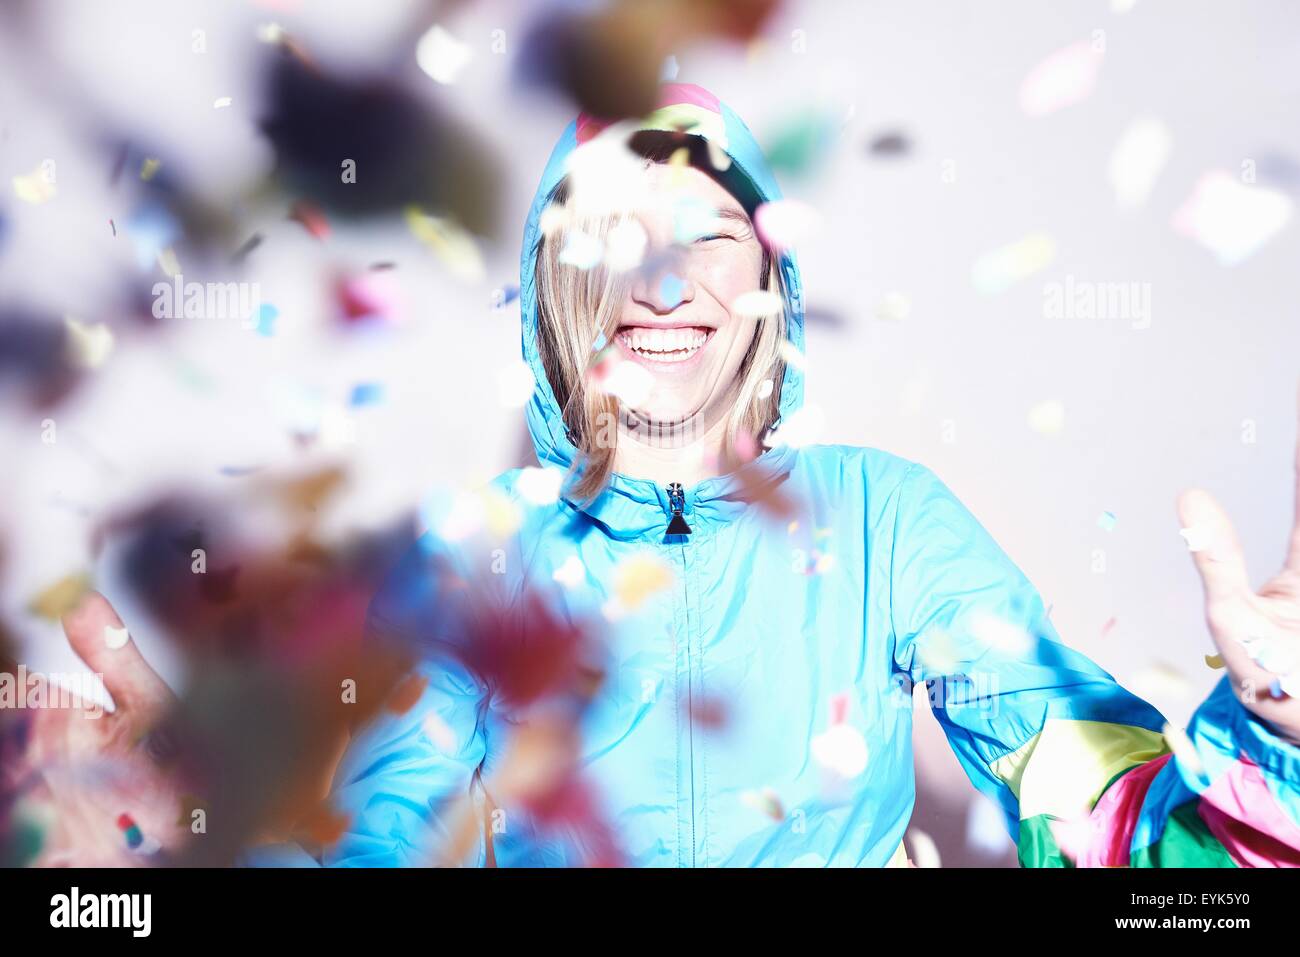 Studio shot of young woman scattering confetti Stock Photo